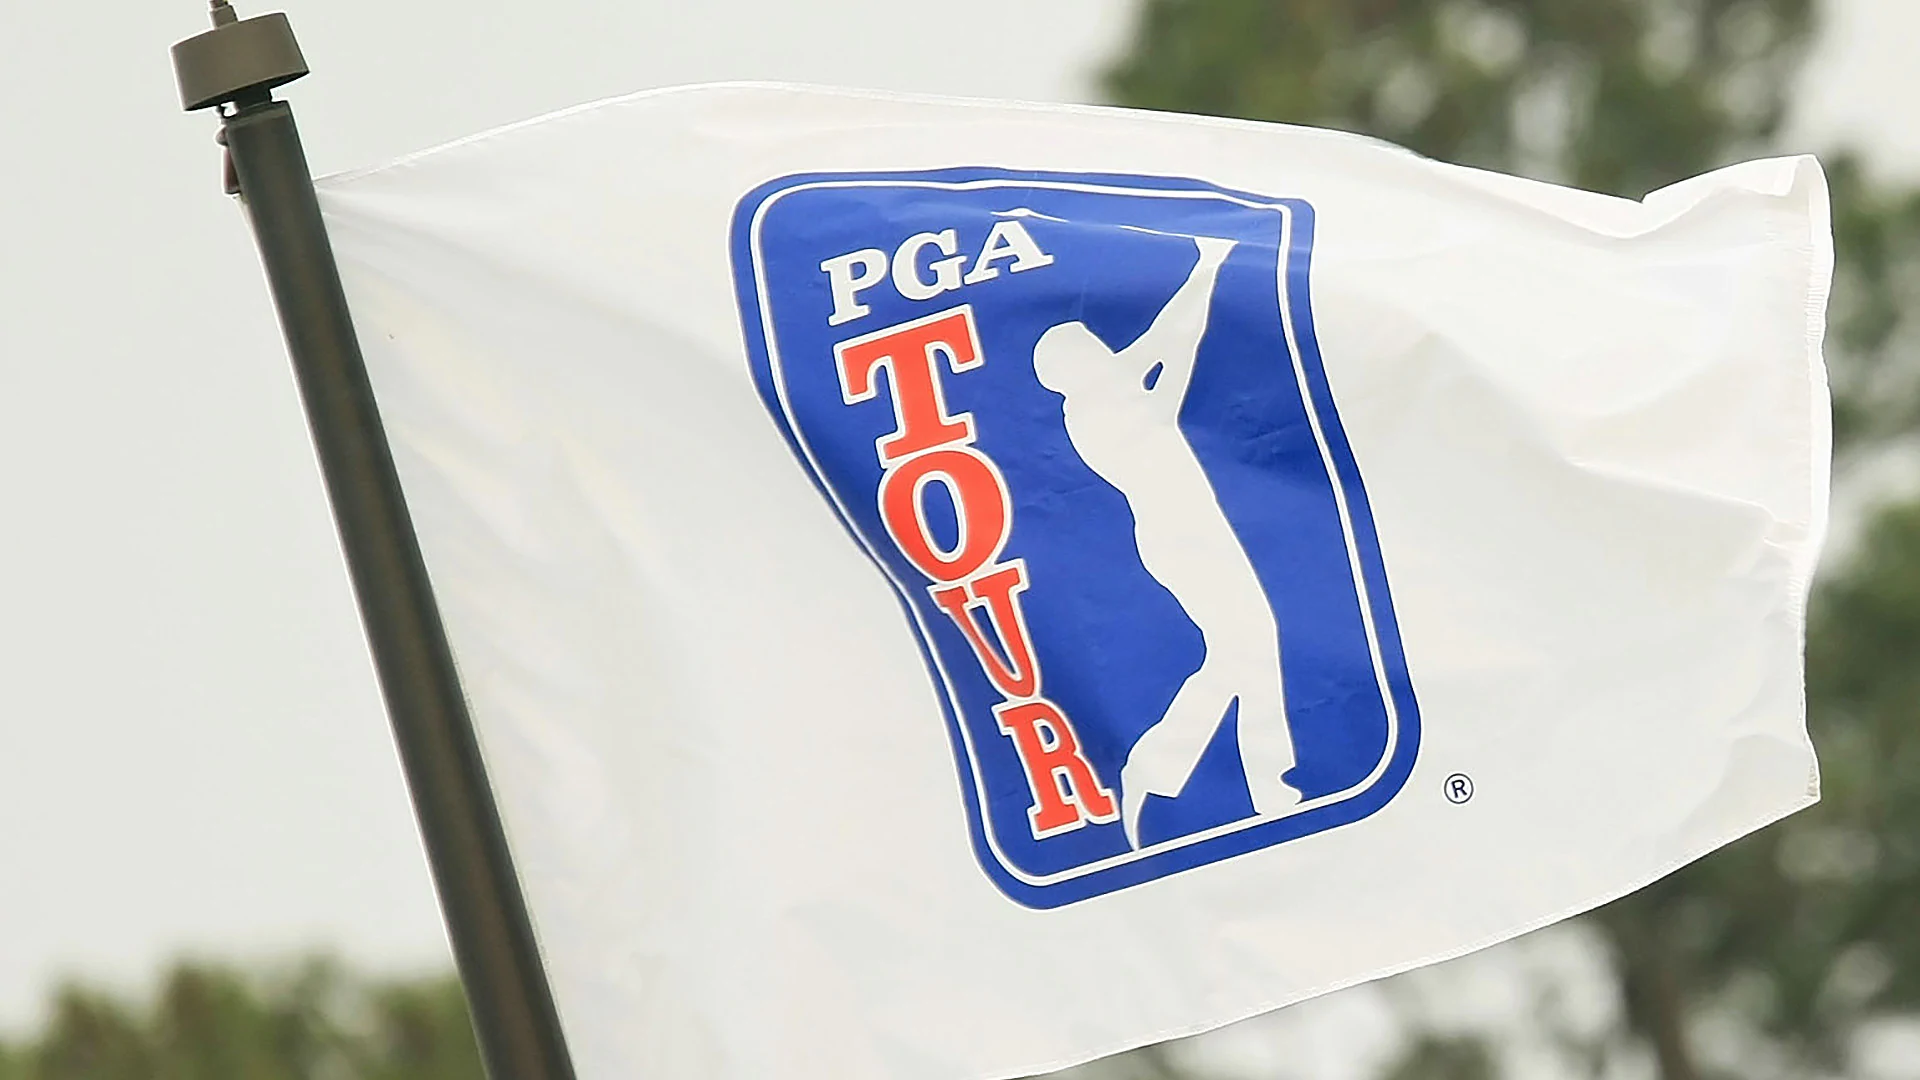 PGA Tour to implement new slow-play policy at Tournament of Champions